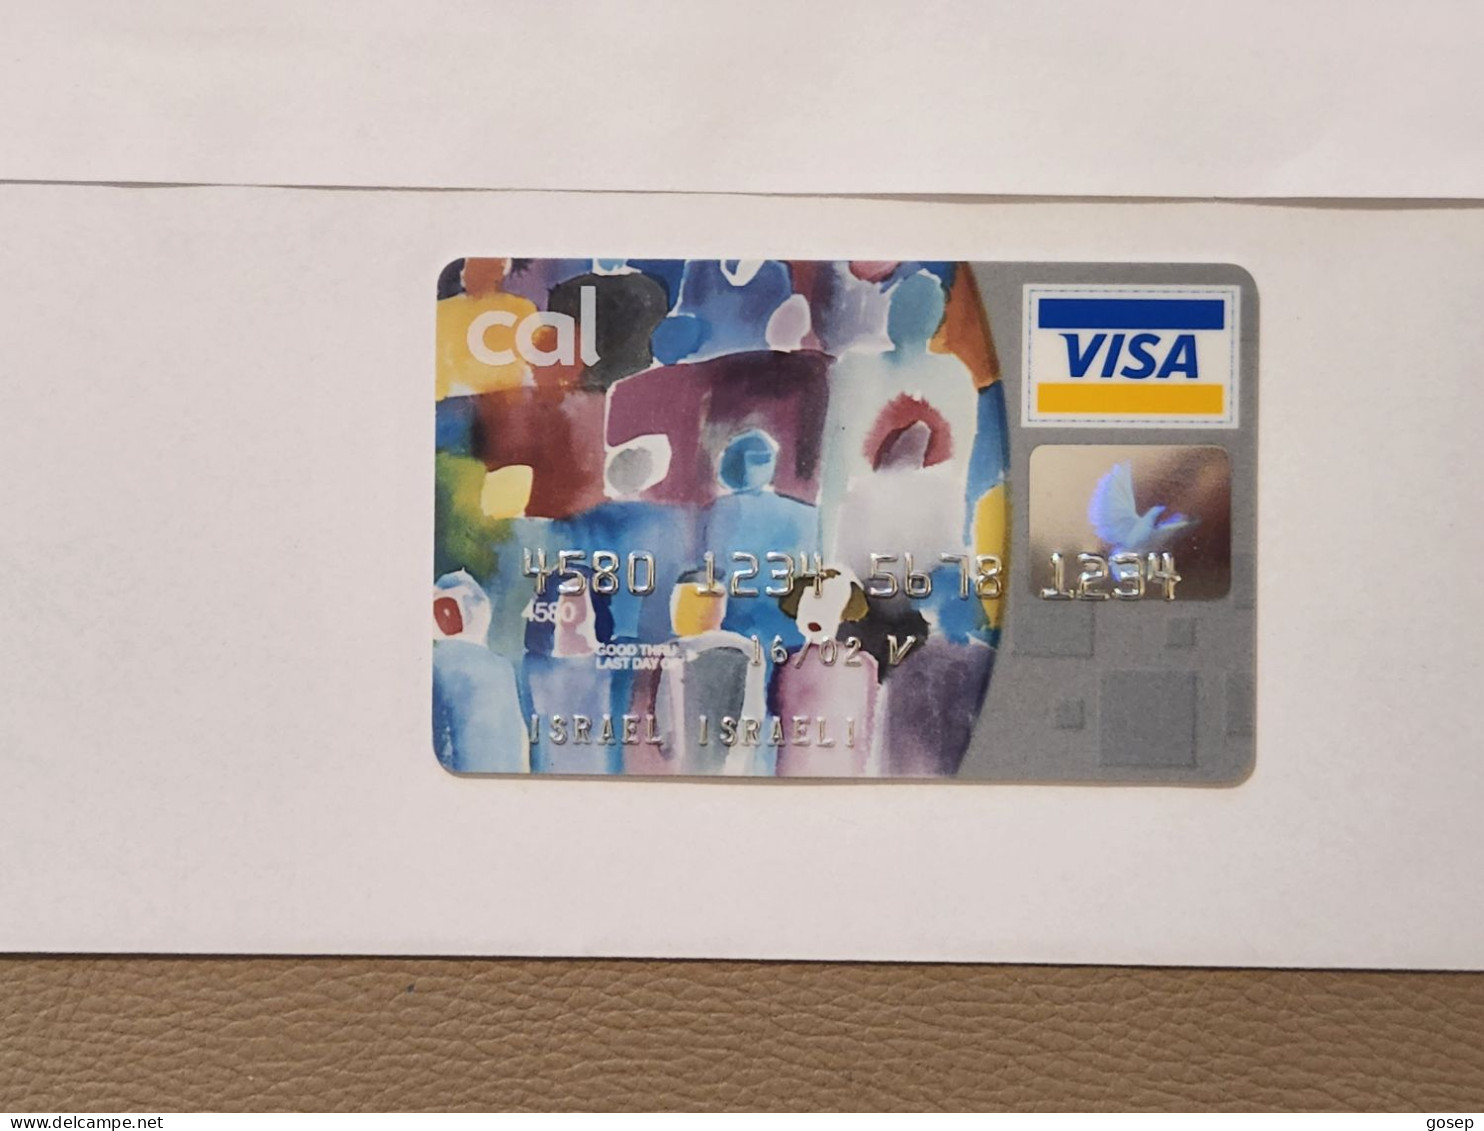 ISRAEL-CALL VISA ELECTRON-(4580-1234-5678-1234)(A Special Rare Experimental Card)-(N)-(16.01.02)-Good Card - Credit Cards (Exp. Date Min. 10 Years)